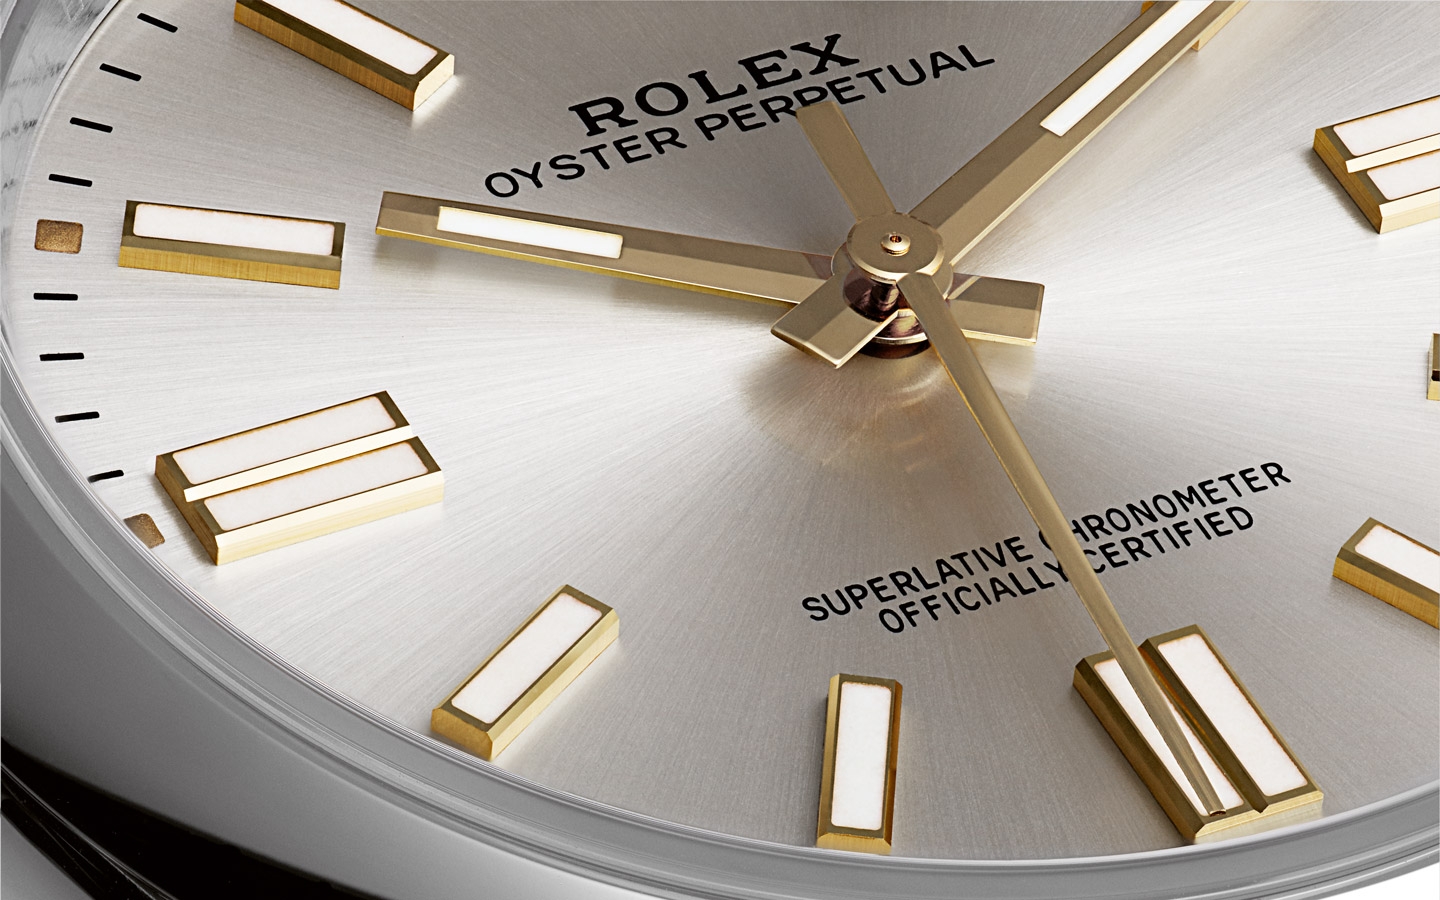 08_Oyster_Perpetual_The_essence_of_the_oyster_two_column_02_desktop_1440x900